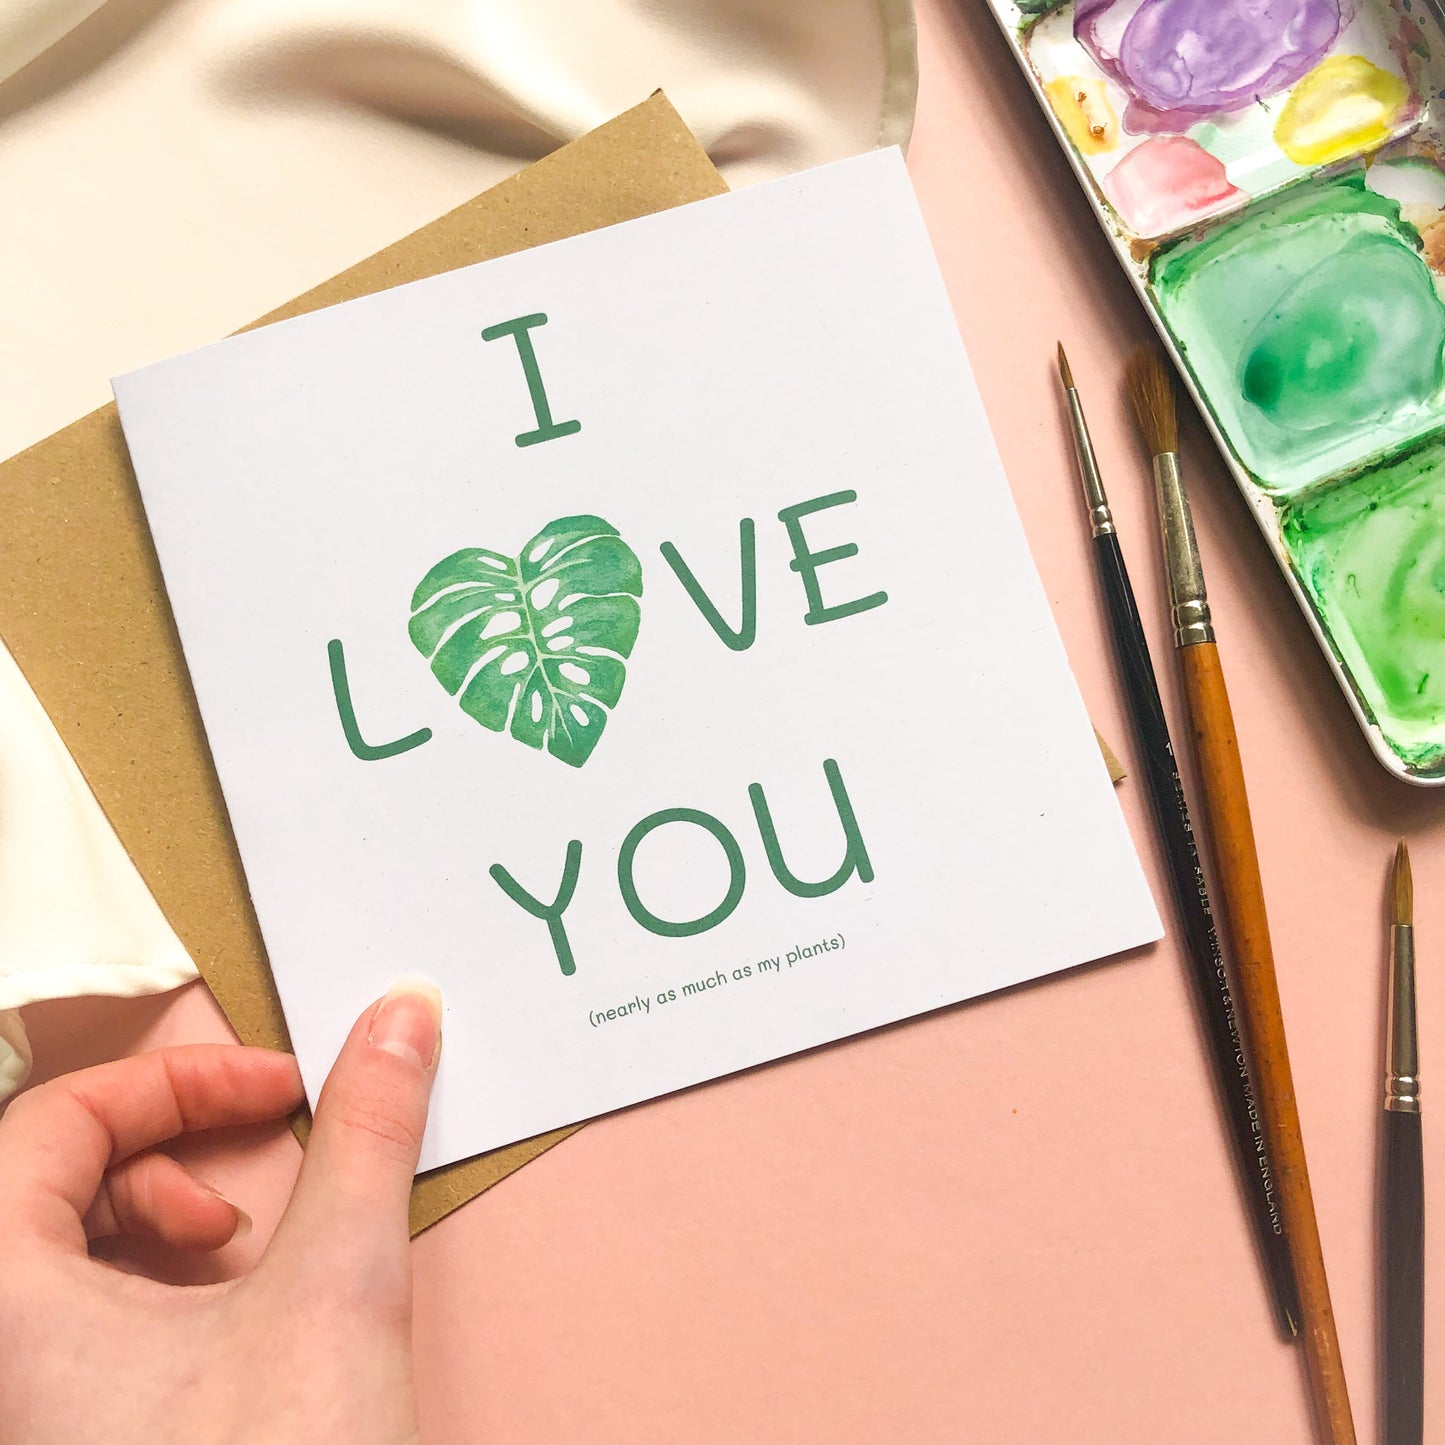 I Love You (nearly as much as my plants) Valentine's Day Card